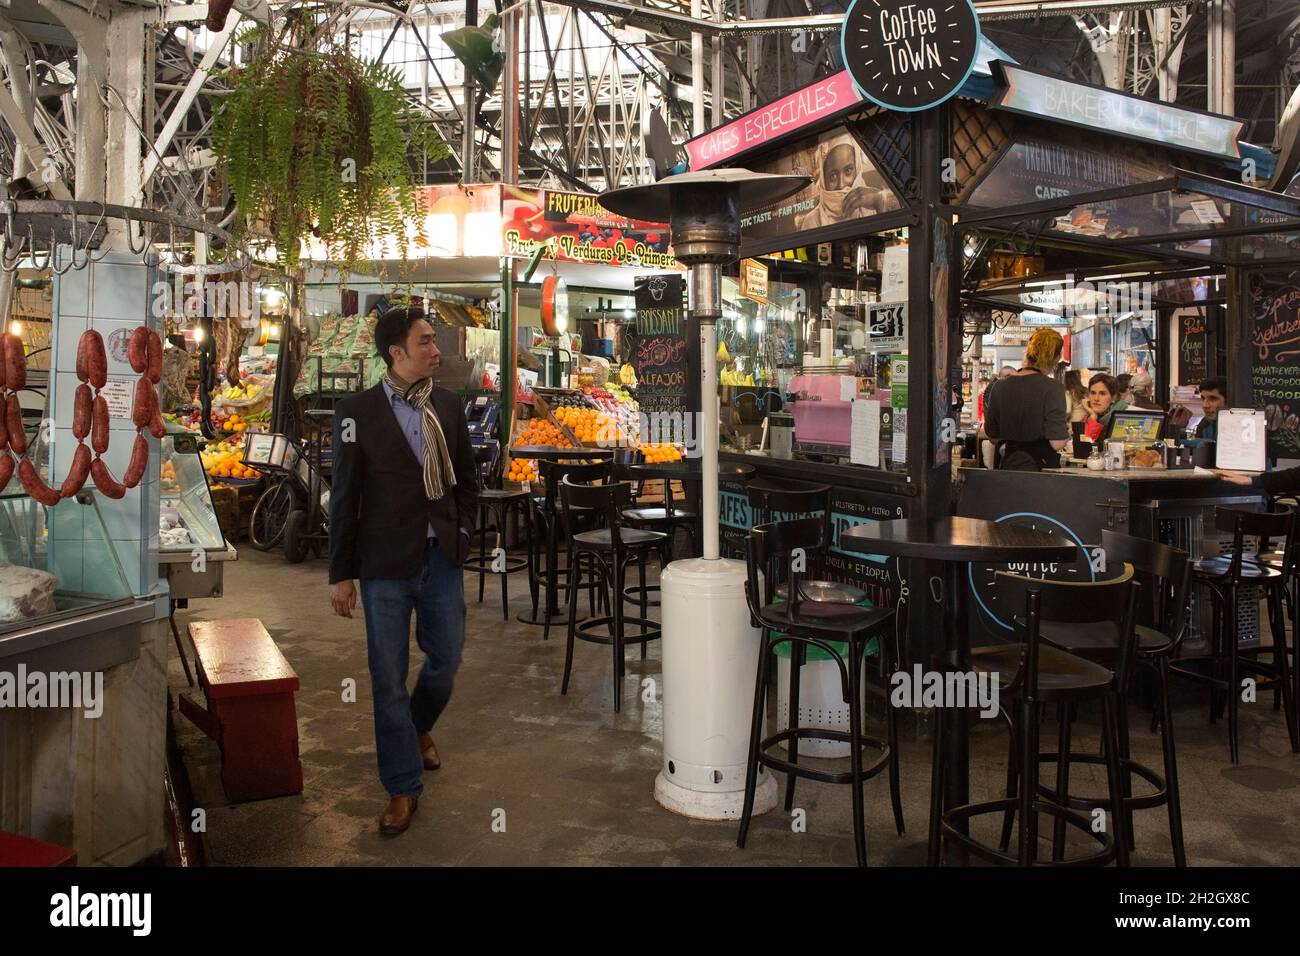 Horizontal shot of an smartly dressed man passing through a coffee shop and some food stalls in San Telmo Market, San Telmo neighborhood, Buenos Aires Stock Photo